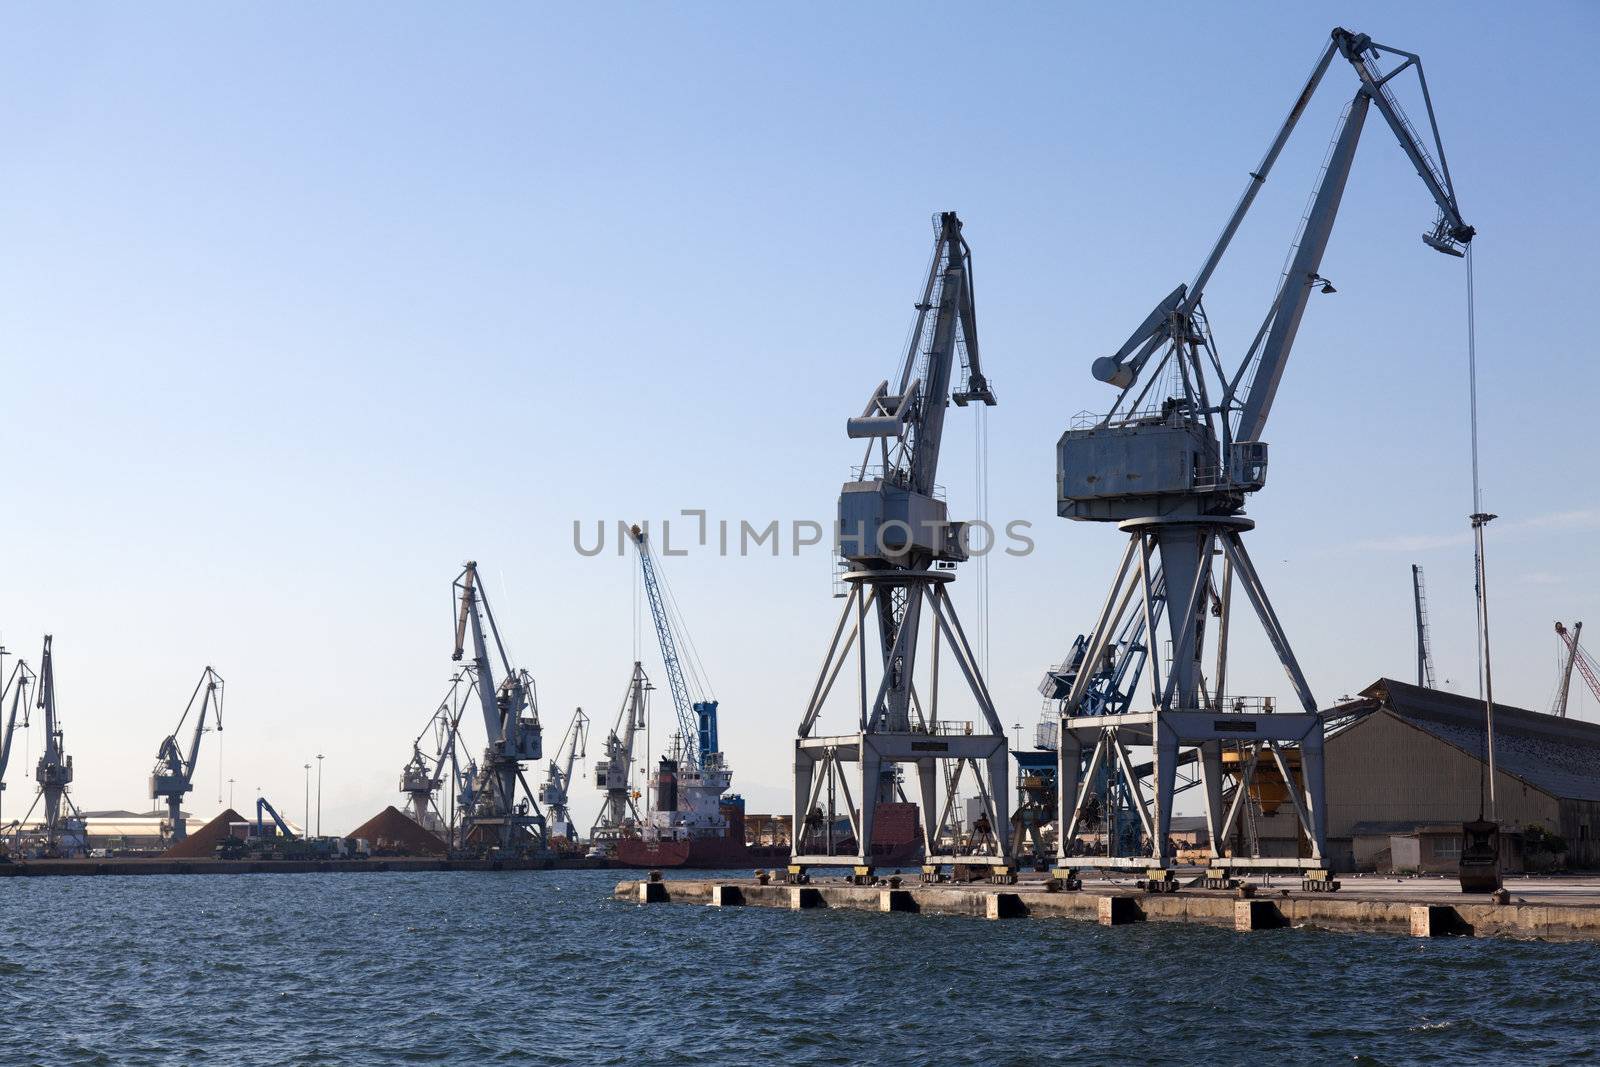 Large cranes in the commercial section of the port of Thessaloniki by Portokalis